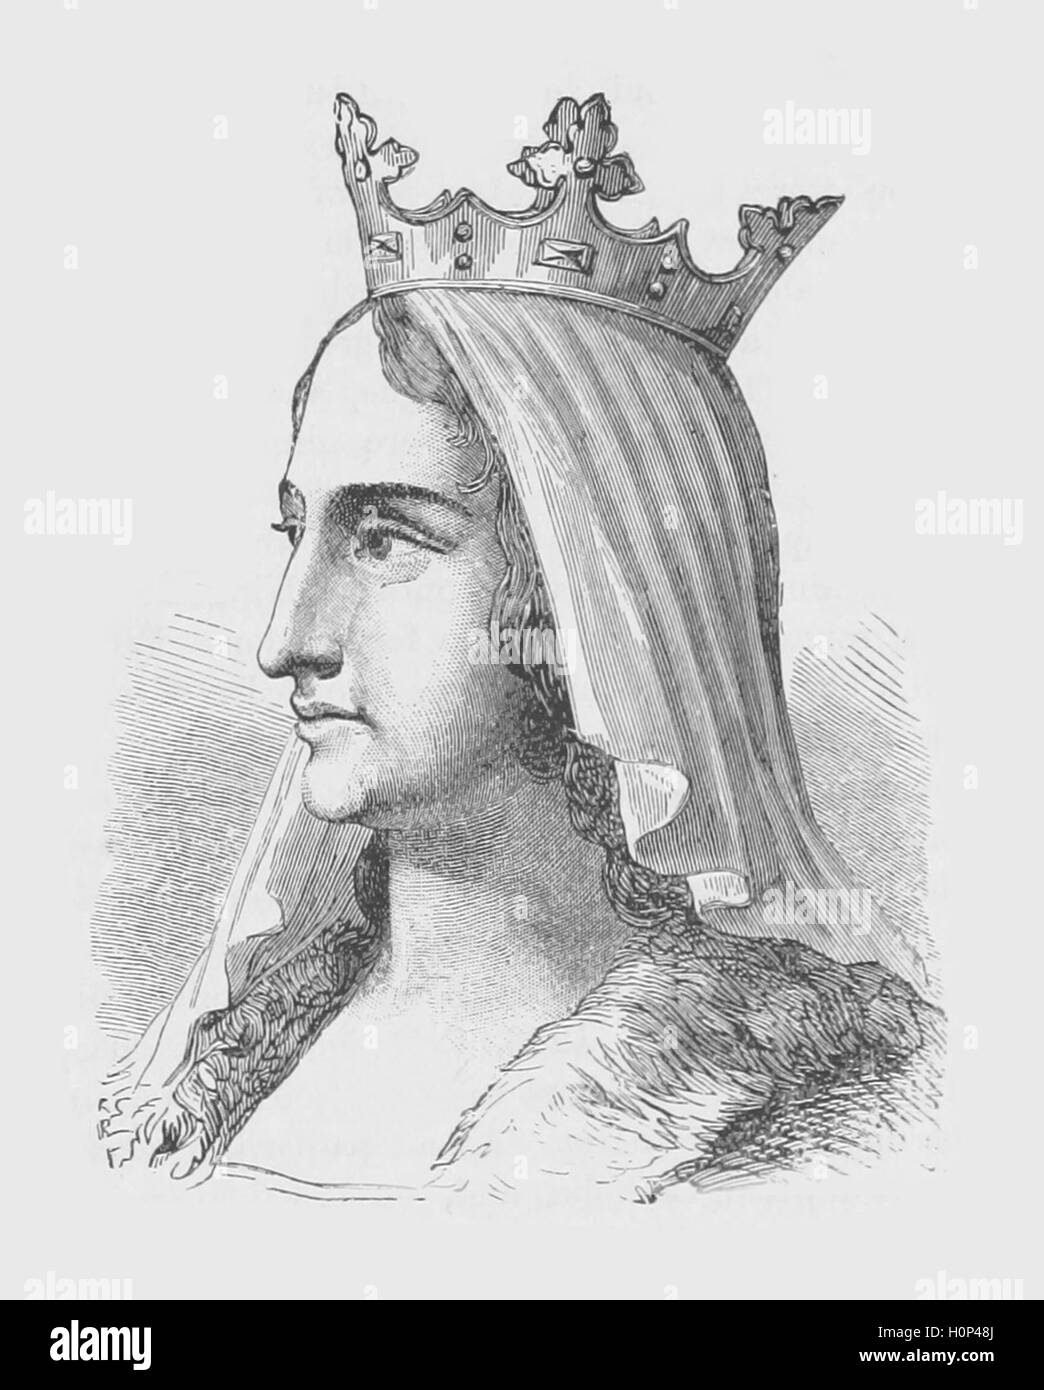 Blanche of Castile  Blanche of Castile was Queen of France as the wife of Louis VIII. She acted as regent twice during the reign of her son, Louis IX.  Image sourced from Cassell's Illustrated Universal History (1893). Stock Photo